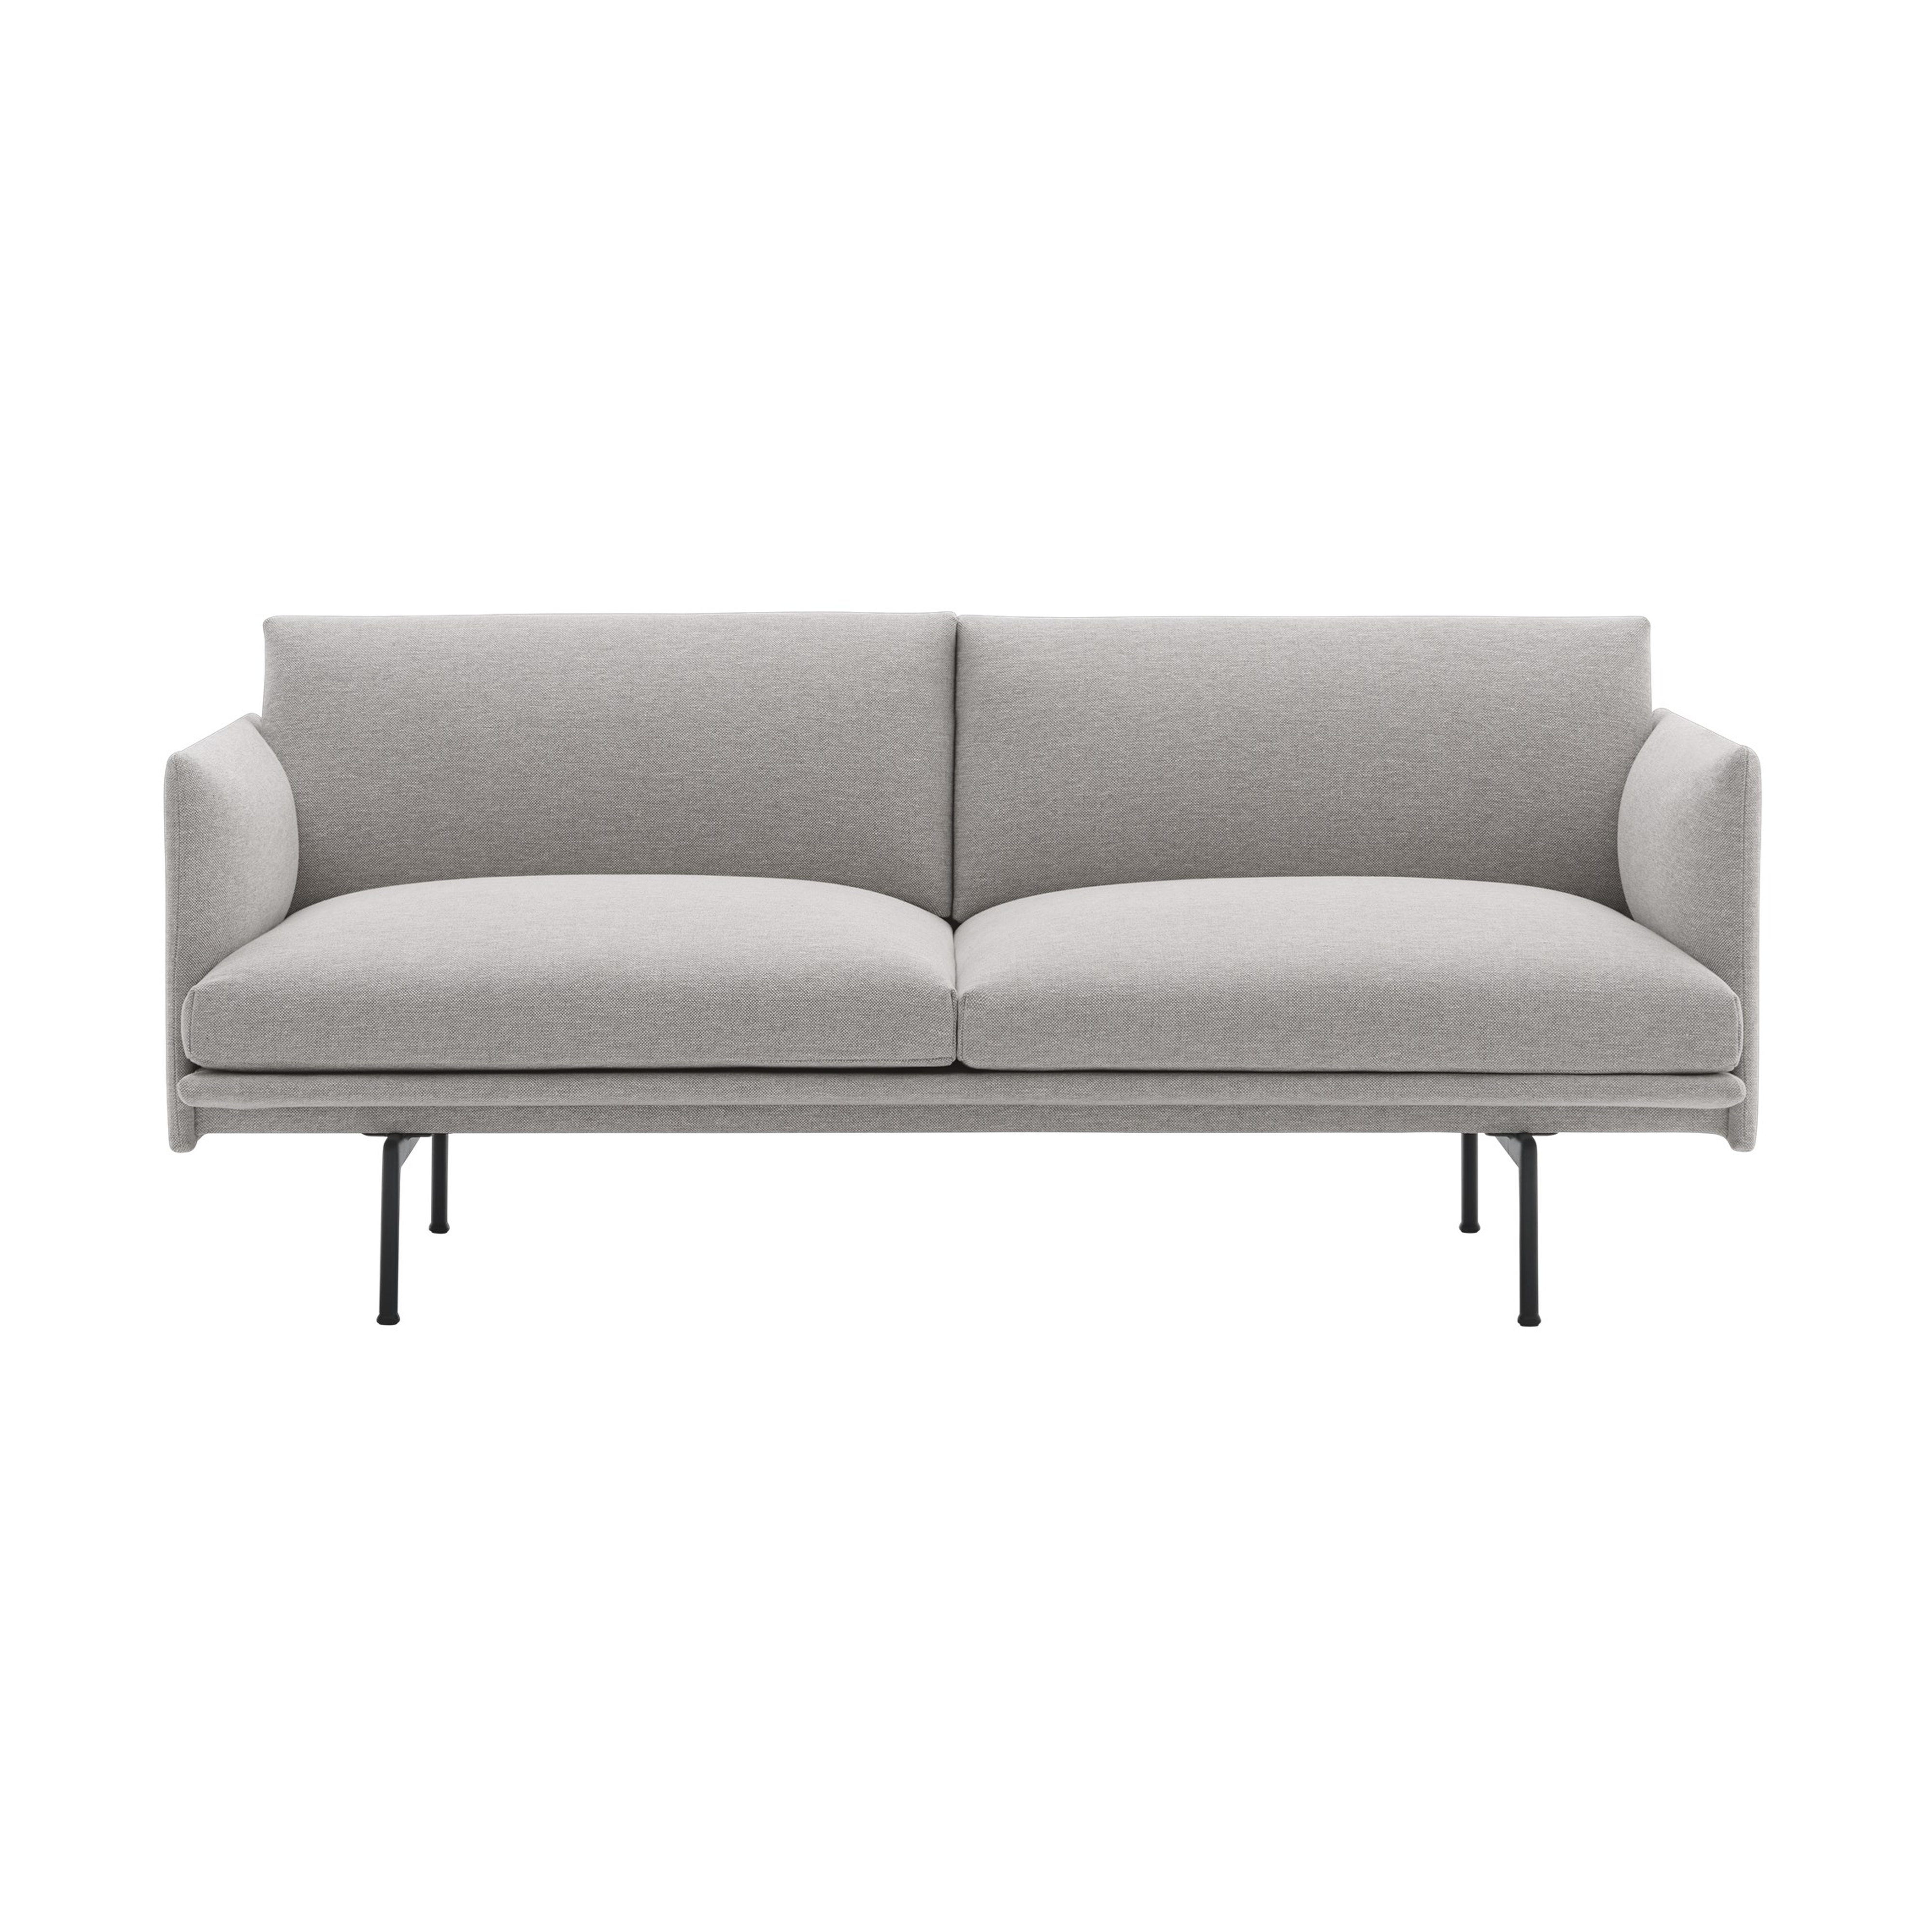 Outline sofa 2-seat from Muuto - NordicNest.com